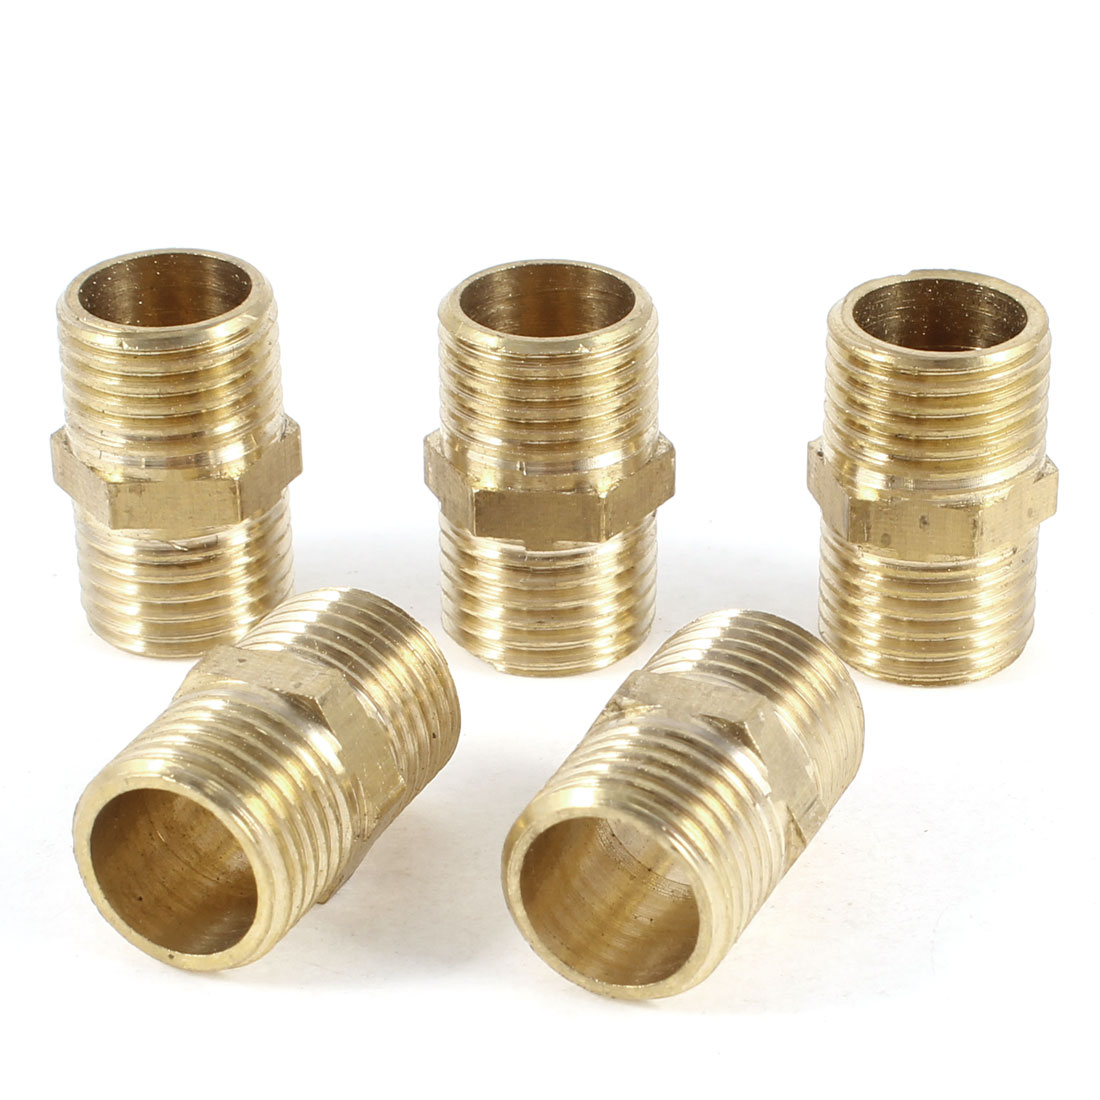 Unique Bargains 5pcs Male 1/4"PT to Male 1/4"PT Straight Pipe Fitting Adapter Connector